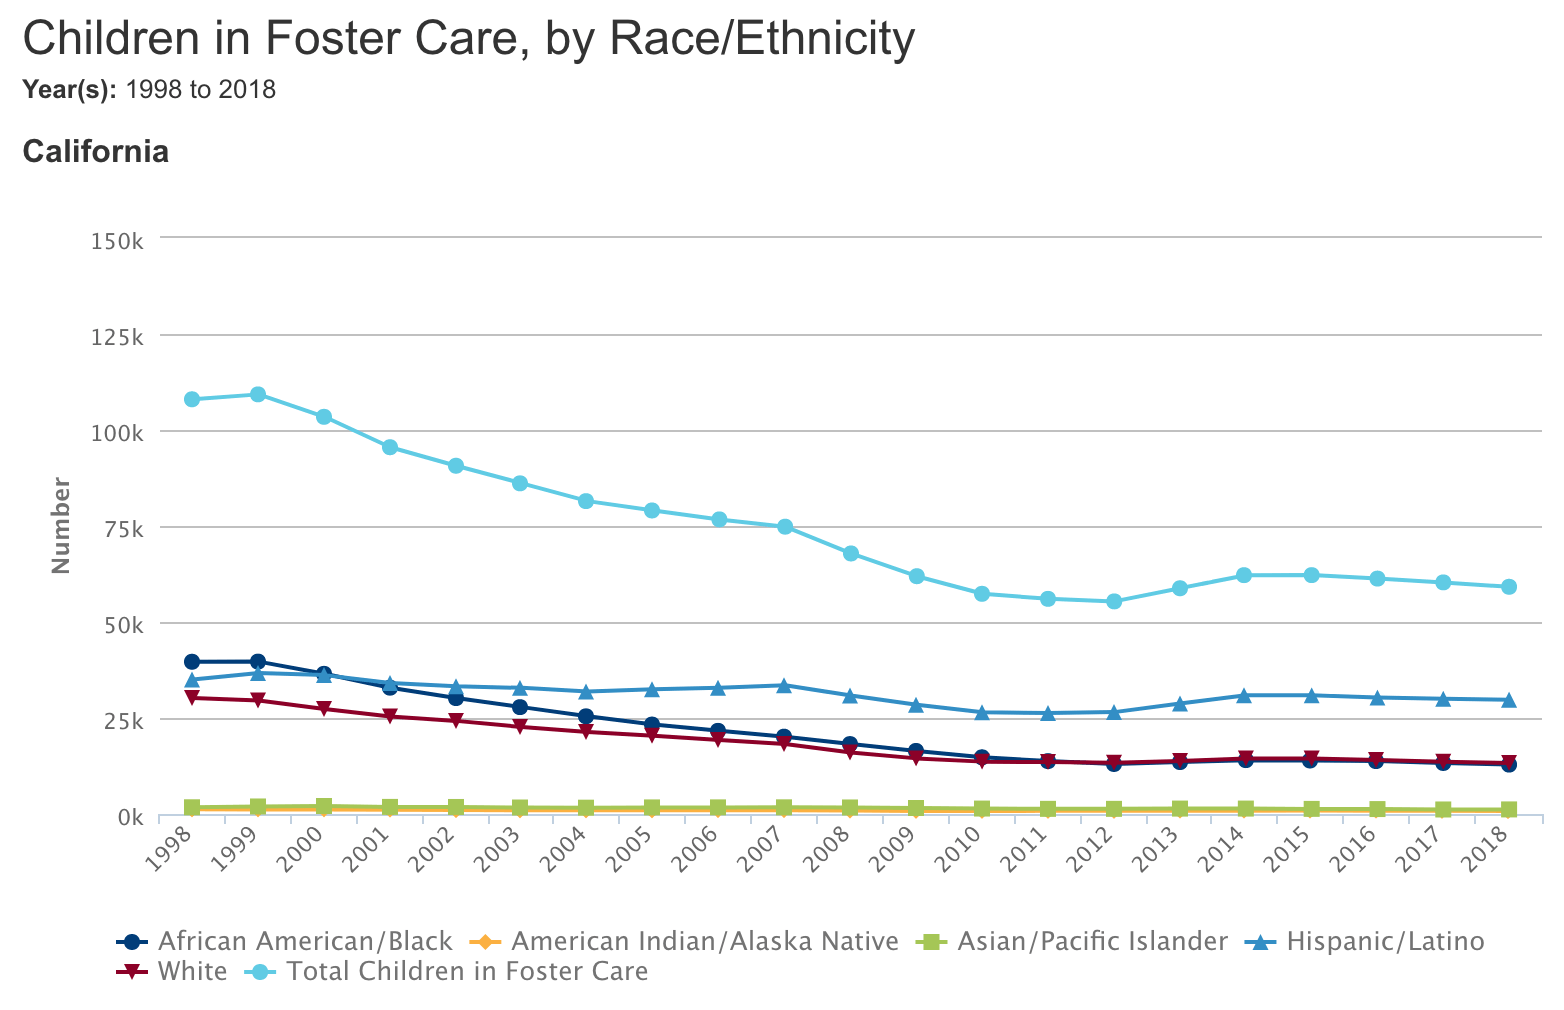 Number of California children in foster care each year, by subgroup. Source: kidsdata.org